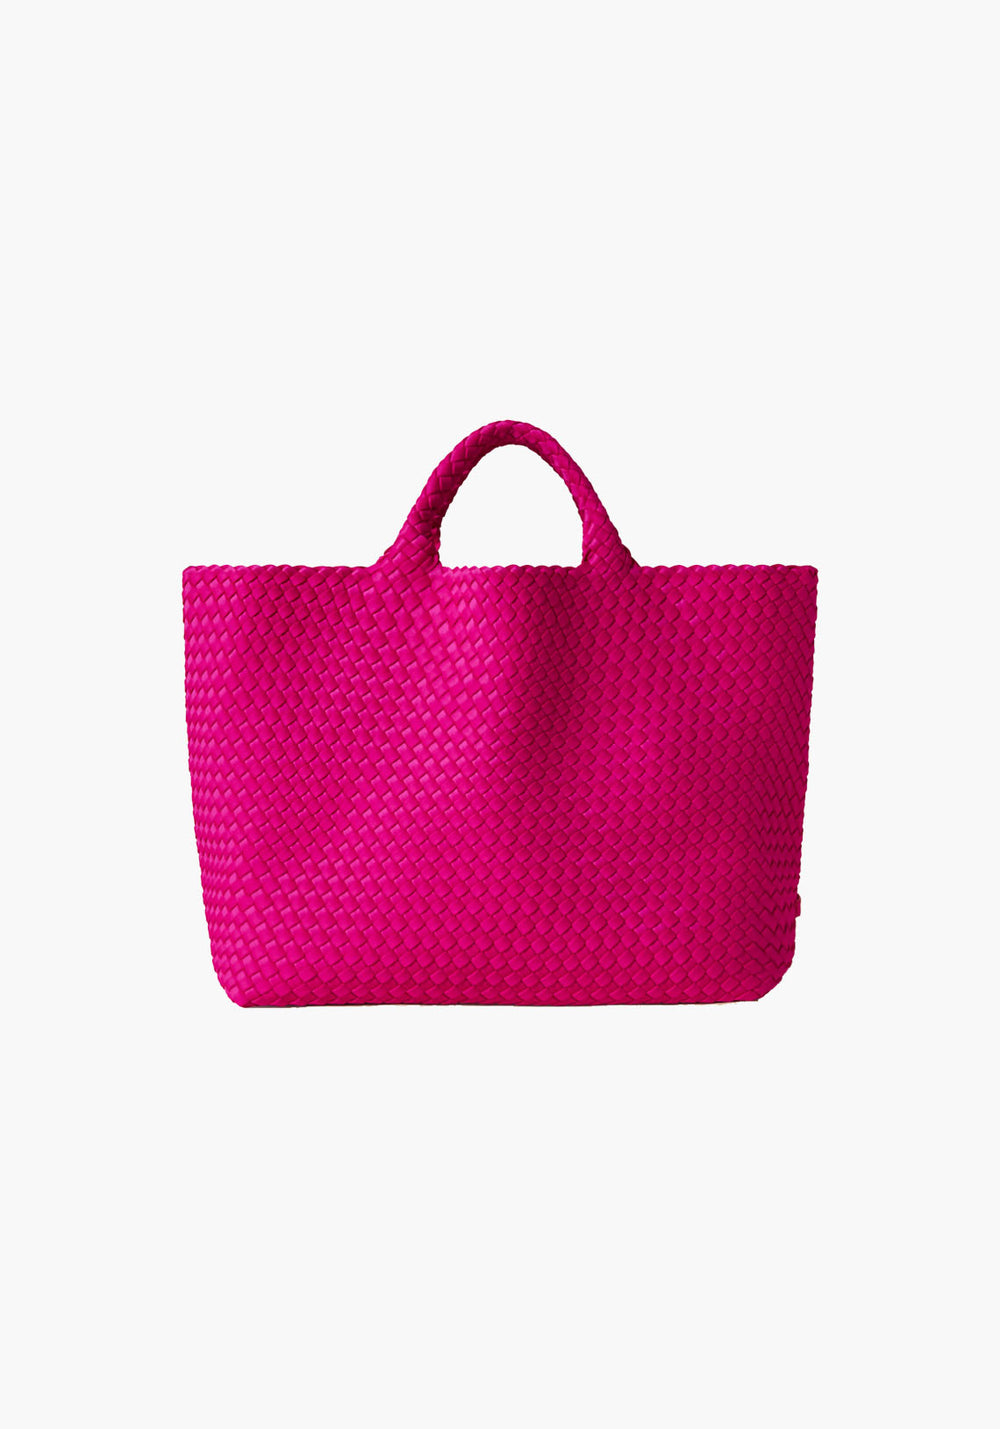 ST BARTHS LARGE TOTE MIAMI PINK